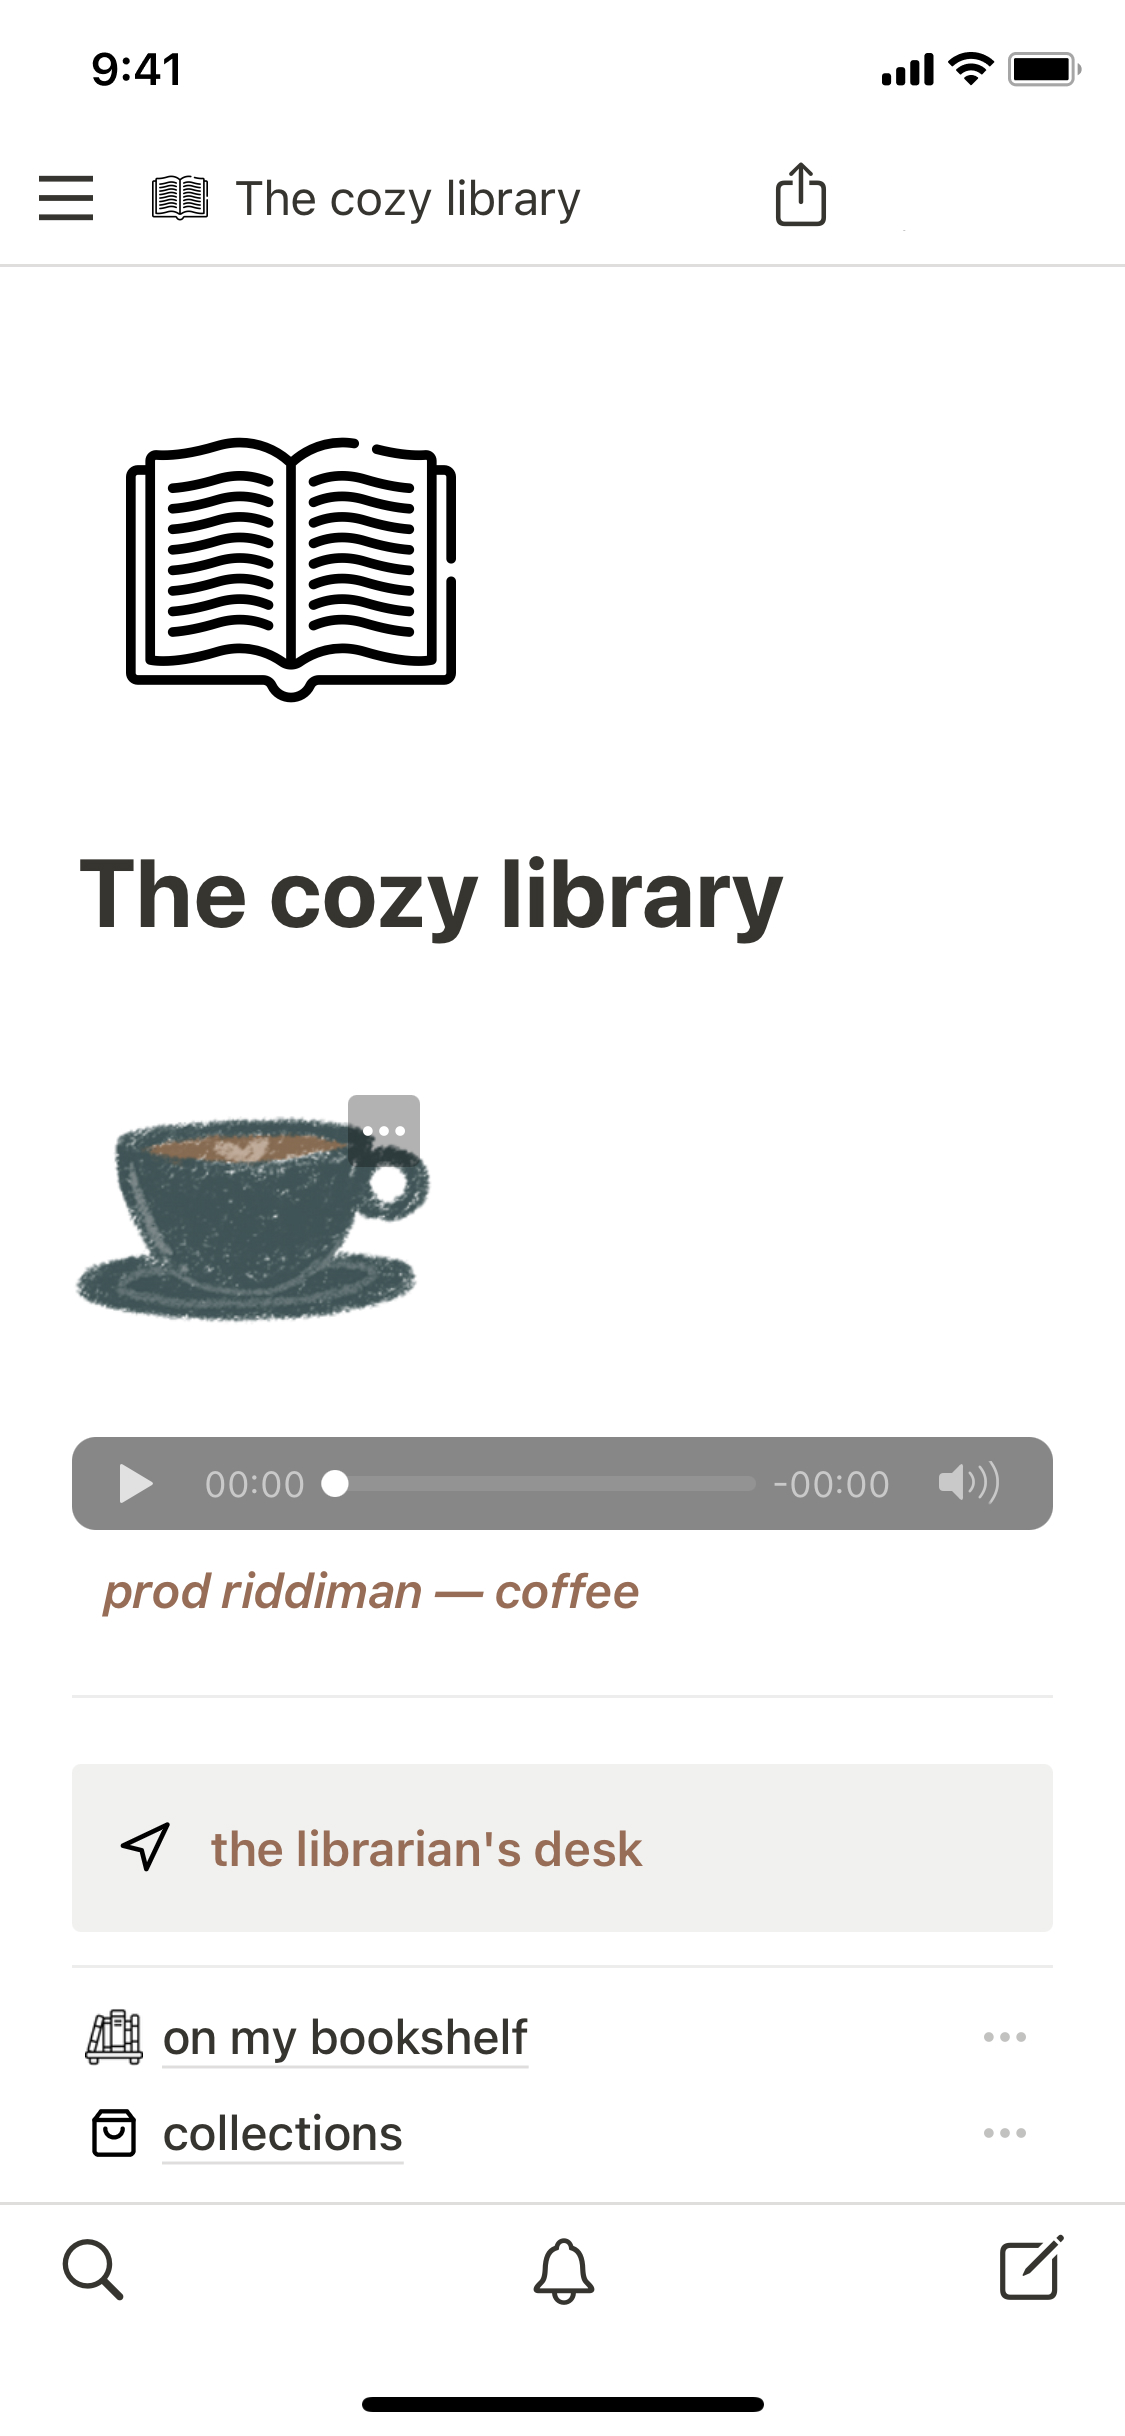 The mobile image for the Cozy library template